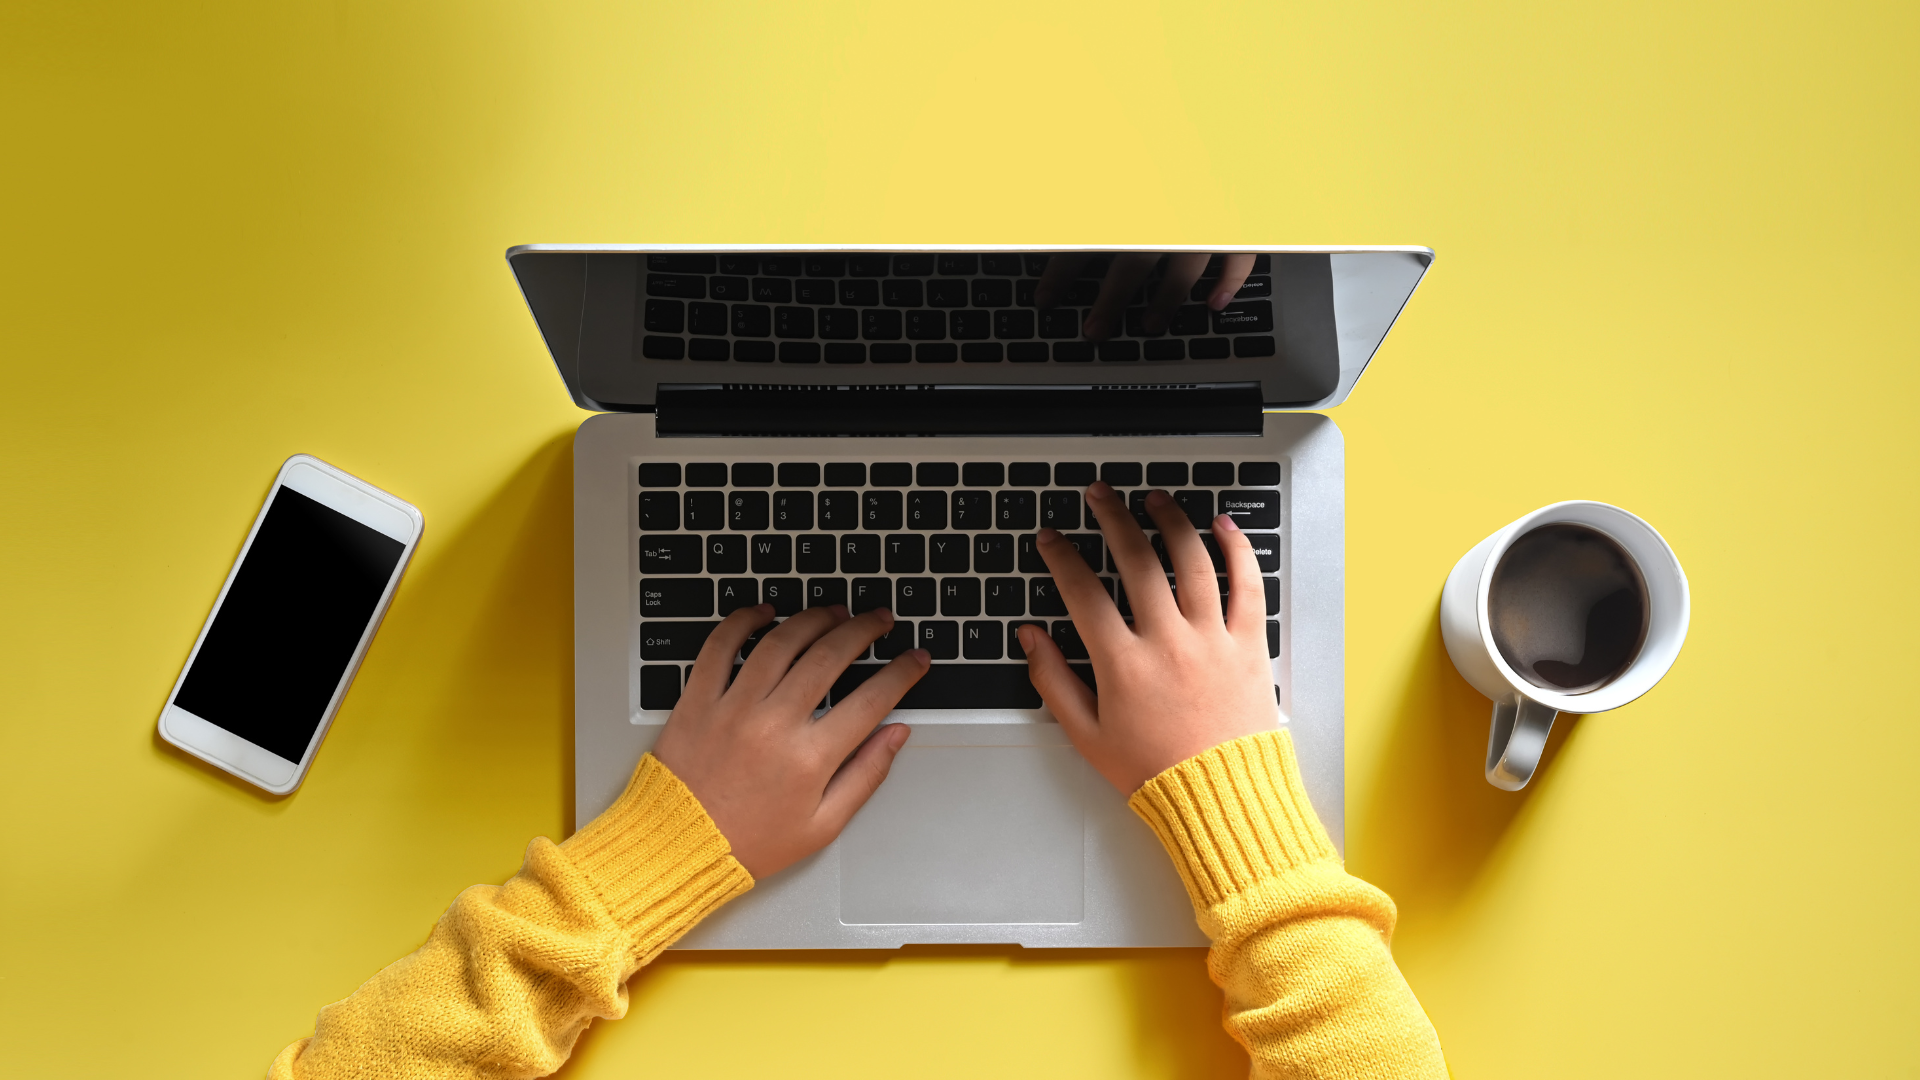 Hands typing on a laptop on yellow background.